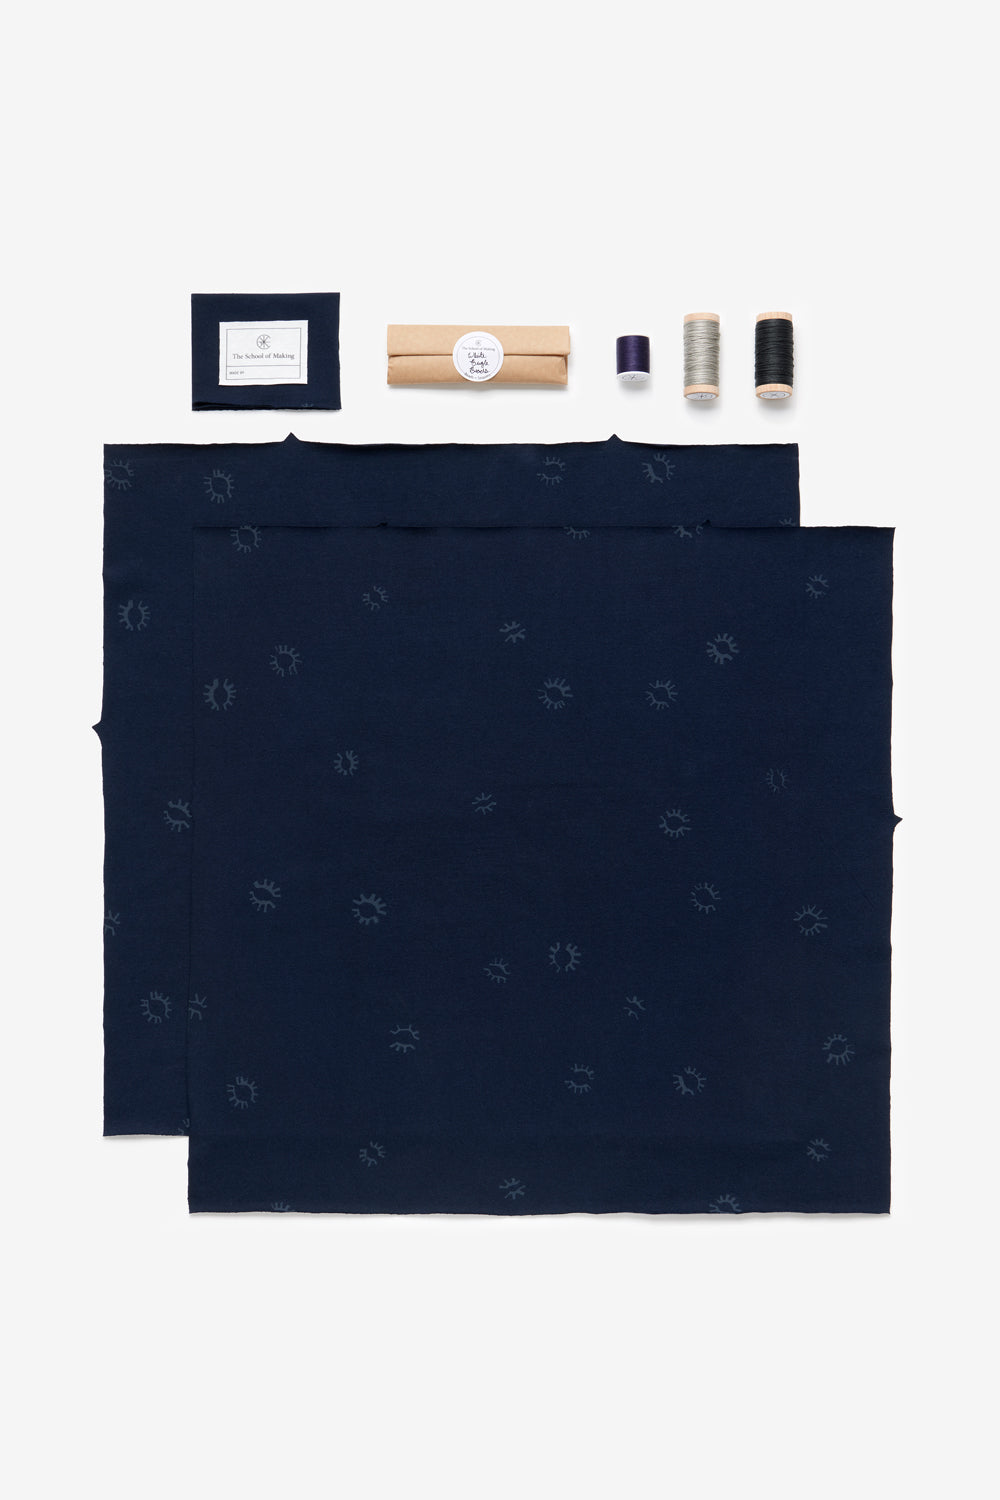 The School of Making DIY kit contents of the Square Top in navy, with Eyelet design. Features pre-cut fabric and notions.